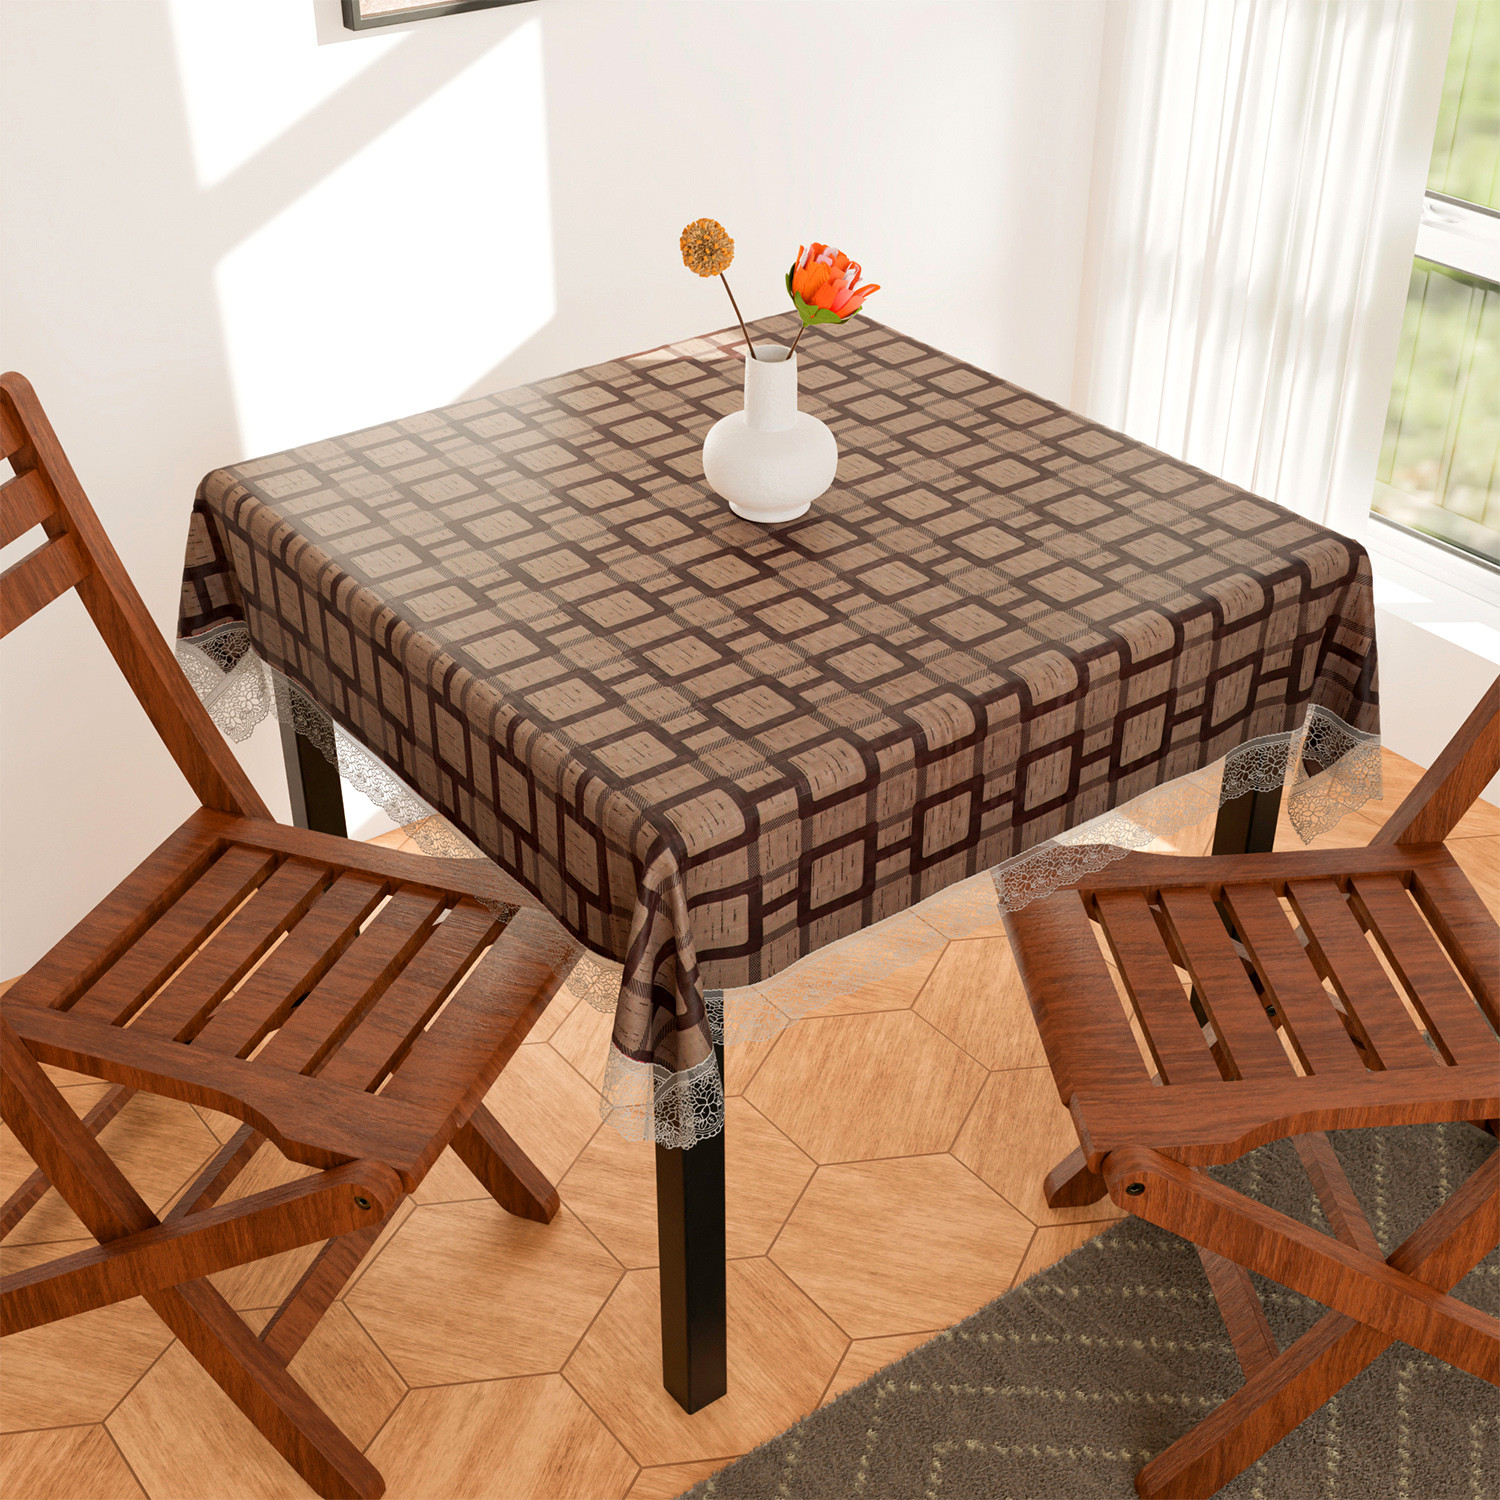 Kuber Industries Square Table Cover for 4 Seater|PVC Waterproof Square Pattern Tablecloth Indoor & Outdoor|48x48 Inch (Brown)